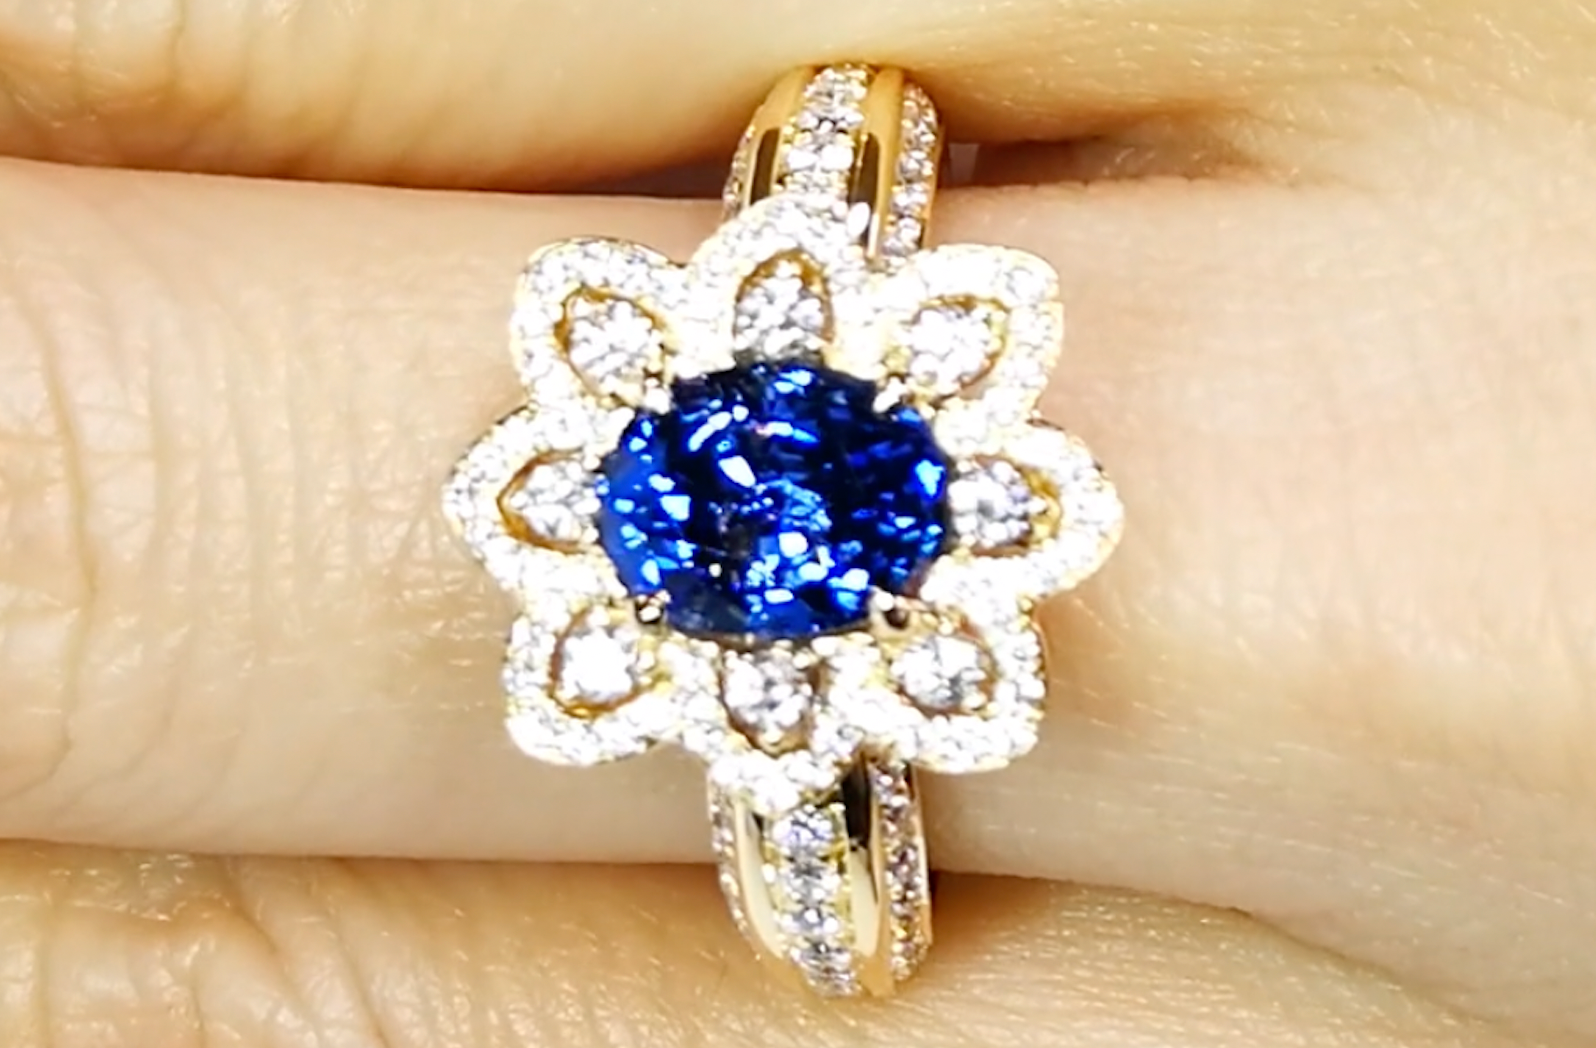 3.15ct Unheated Burmese Cornflower Blue Sapphire Ring with D Flawless Diamonds set in 18K Yellow Gold